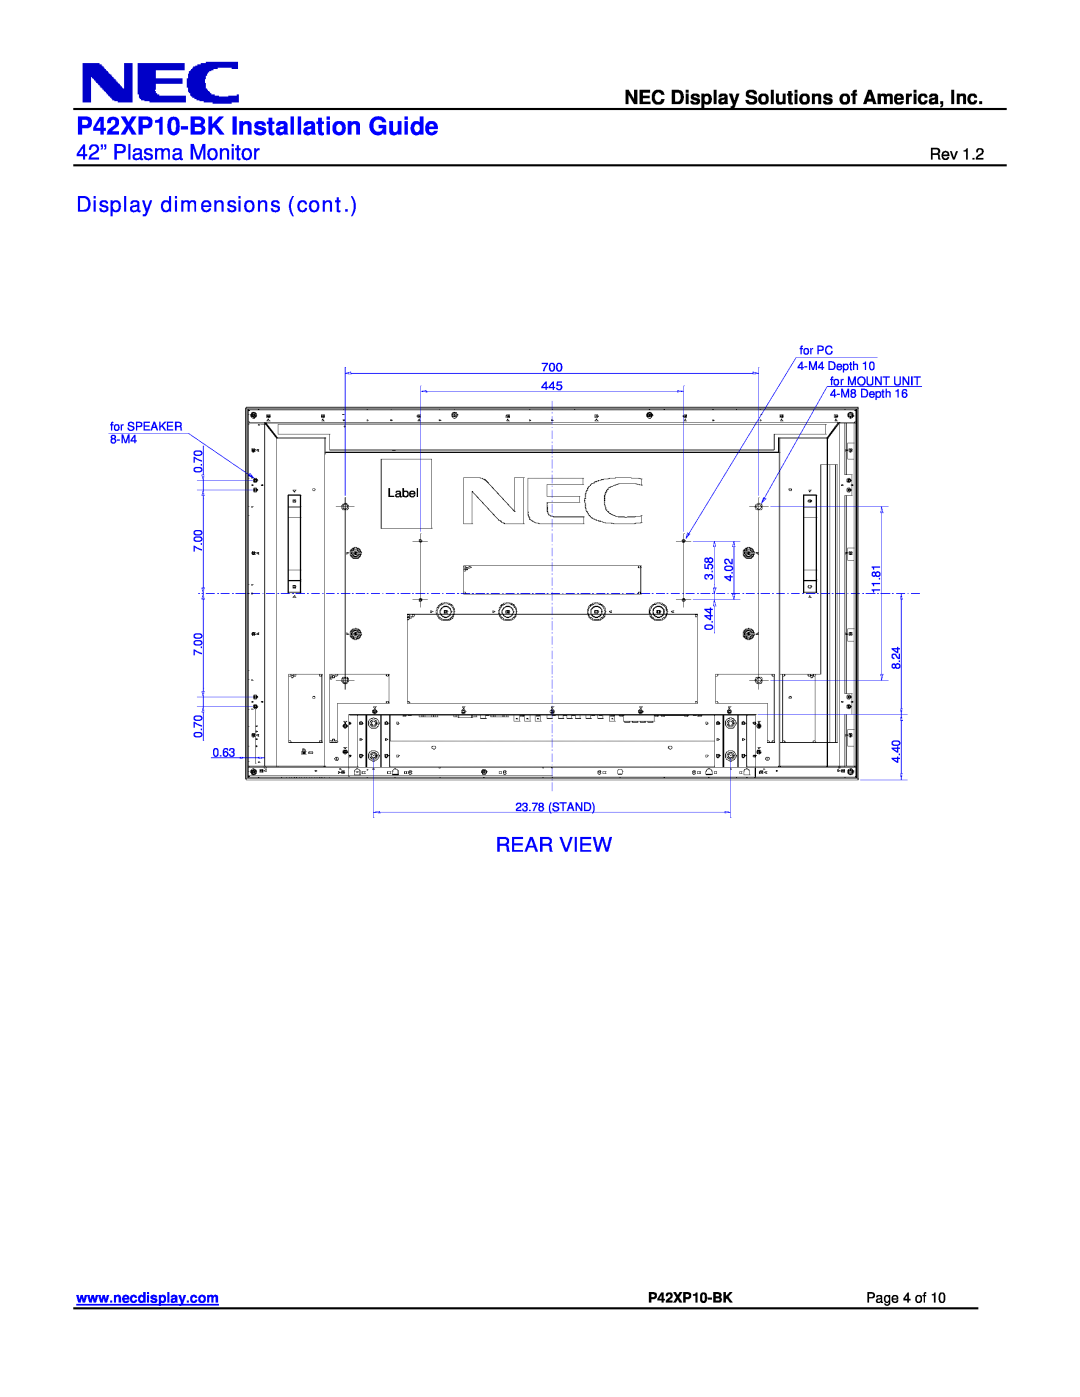 NEC Display dimensions cont, P42XP10-BK Installation Guide, 42” Plasma Monitor, NEC Display Solutions of America, Inc 